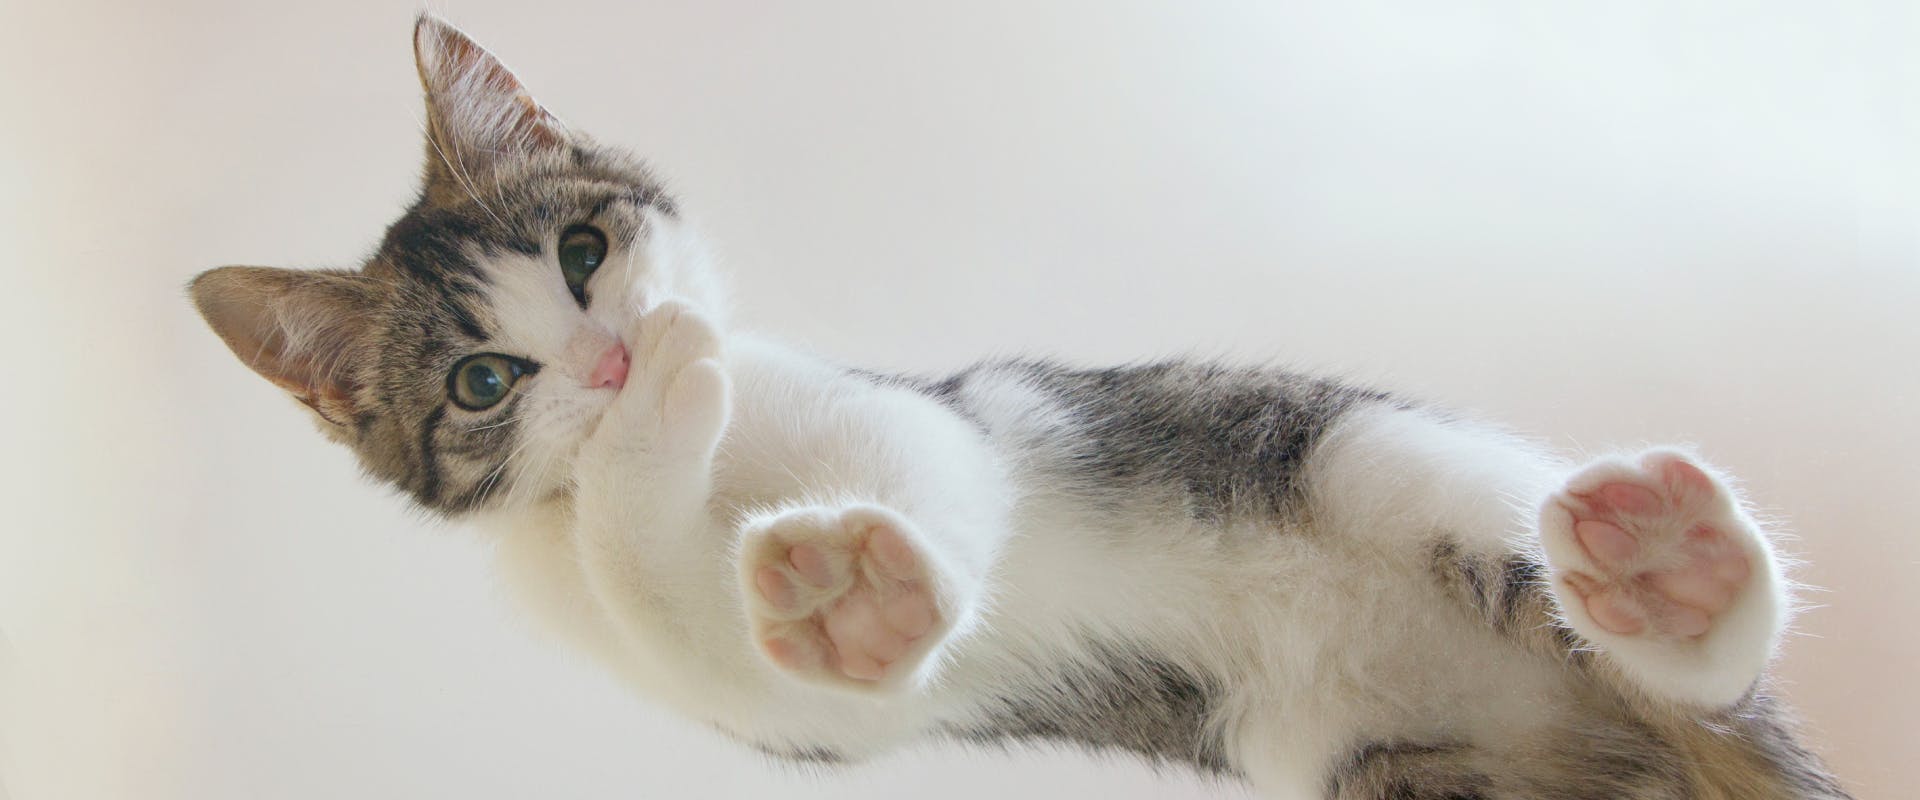 a kitten standing on a glass table with the camera underneath so you can see its toe beans